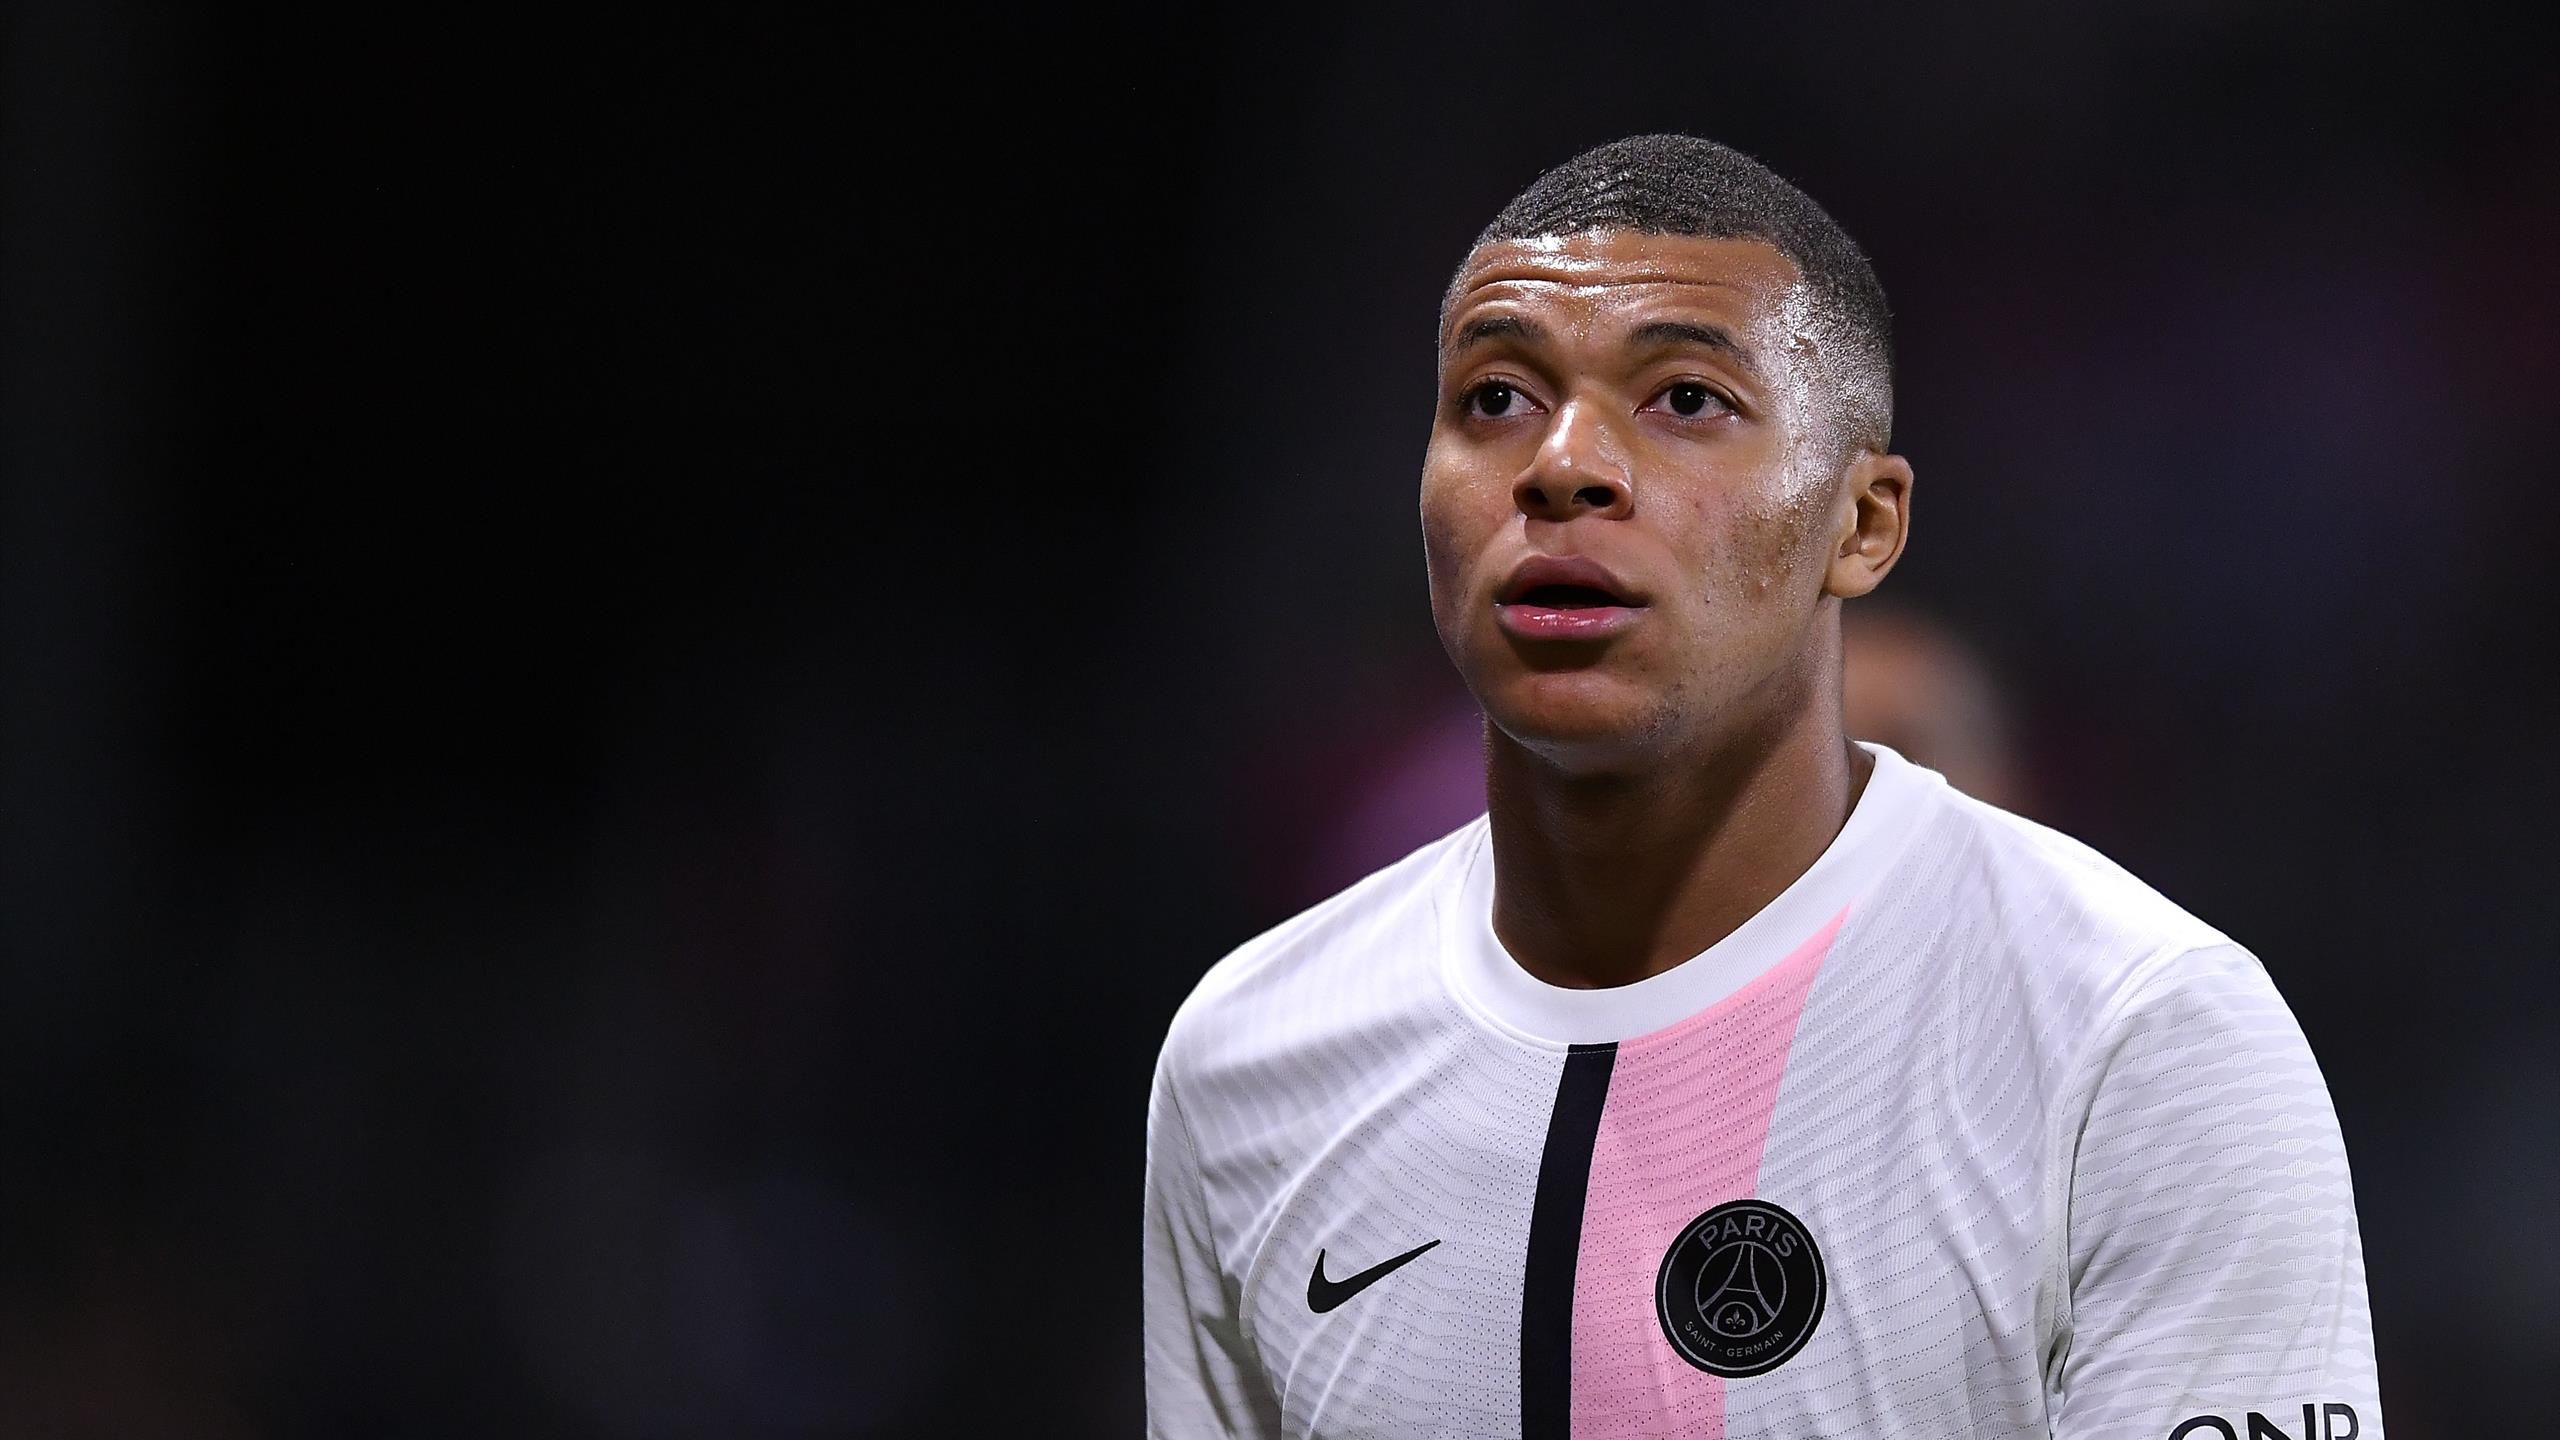 Transfer news - Kylian Mbappe says that he asked to leave PSG this summer  amid Real Madrid interest - Eurosport